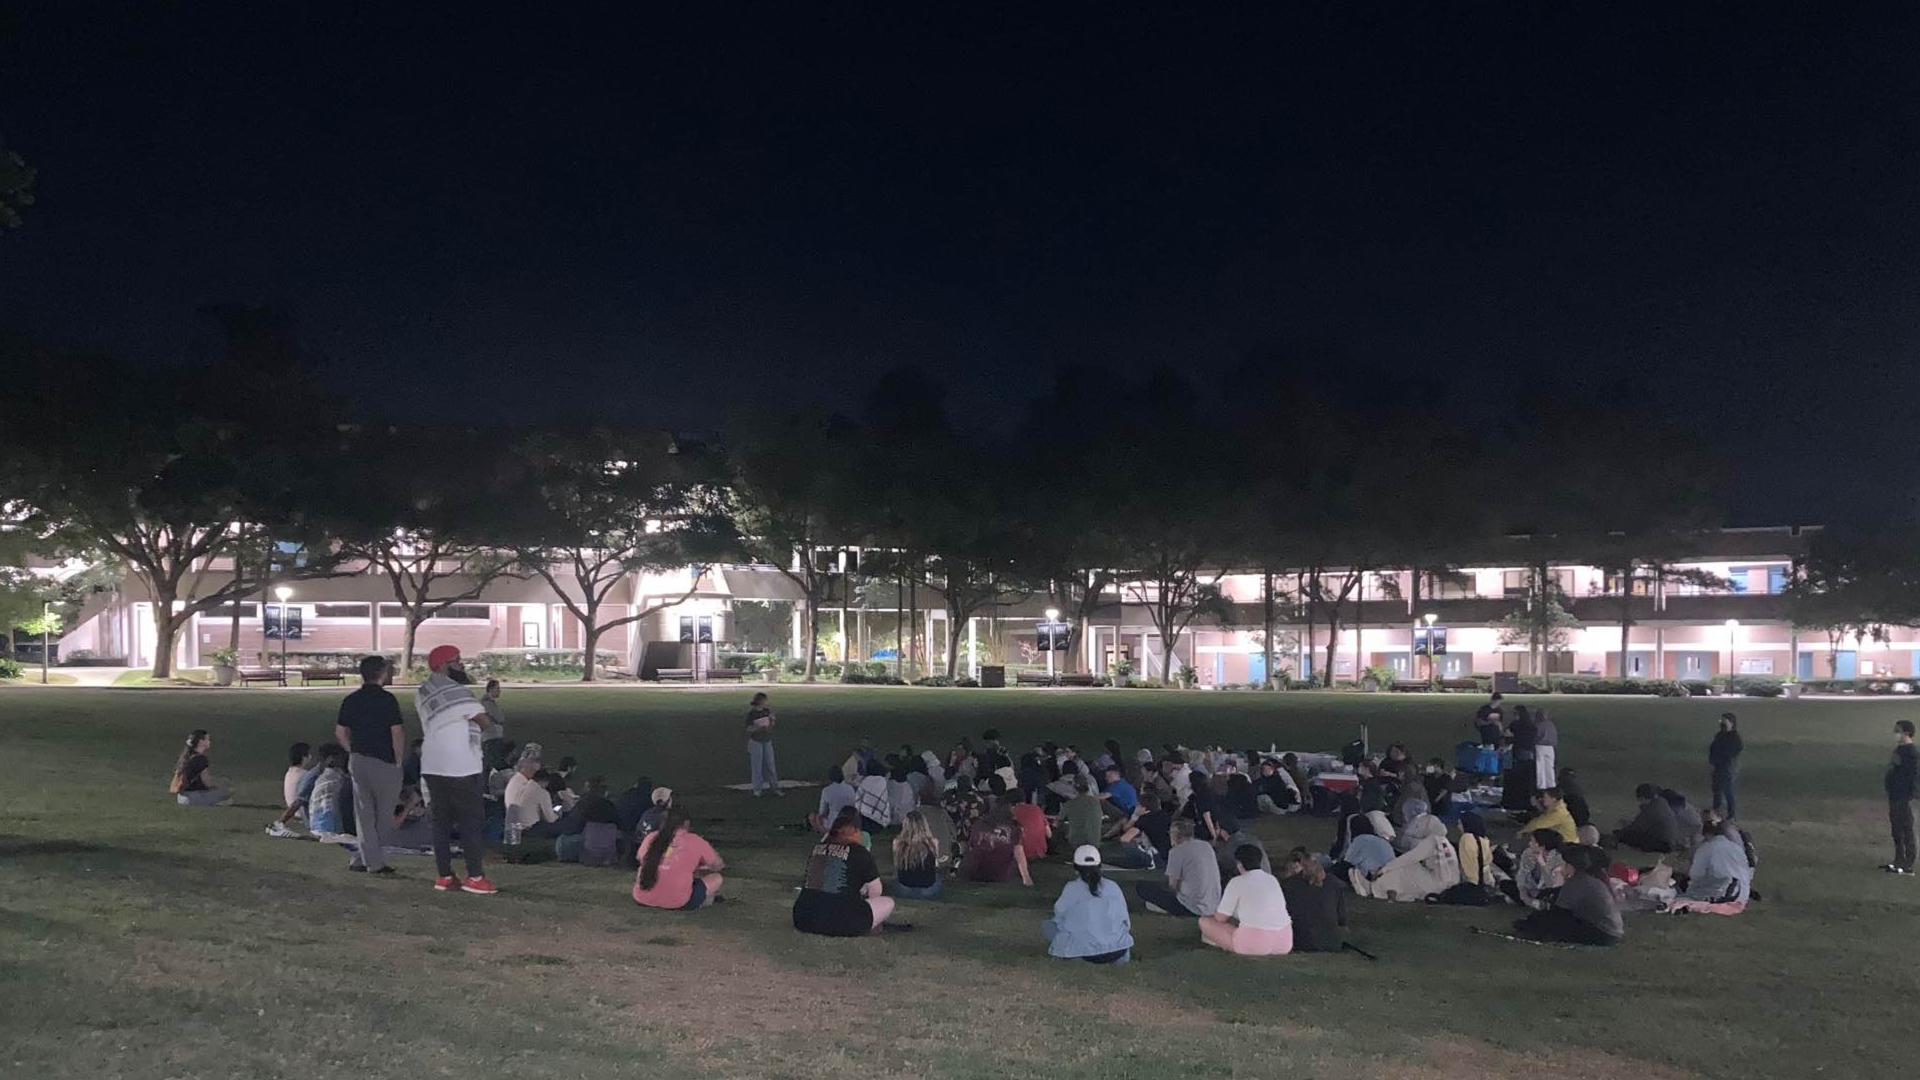 The students were told to leave by 10 p.m. Thursday. They were still on campus chanting for a free Palestine after the curfew.